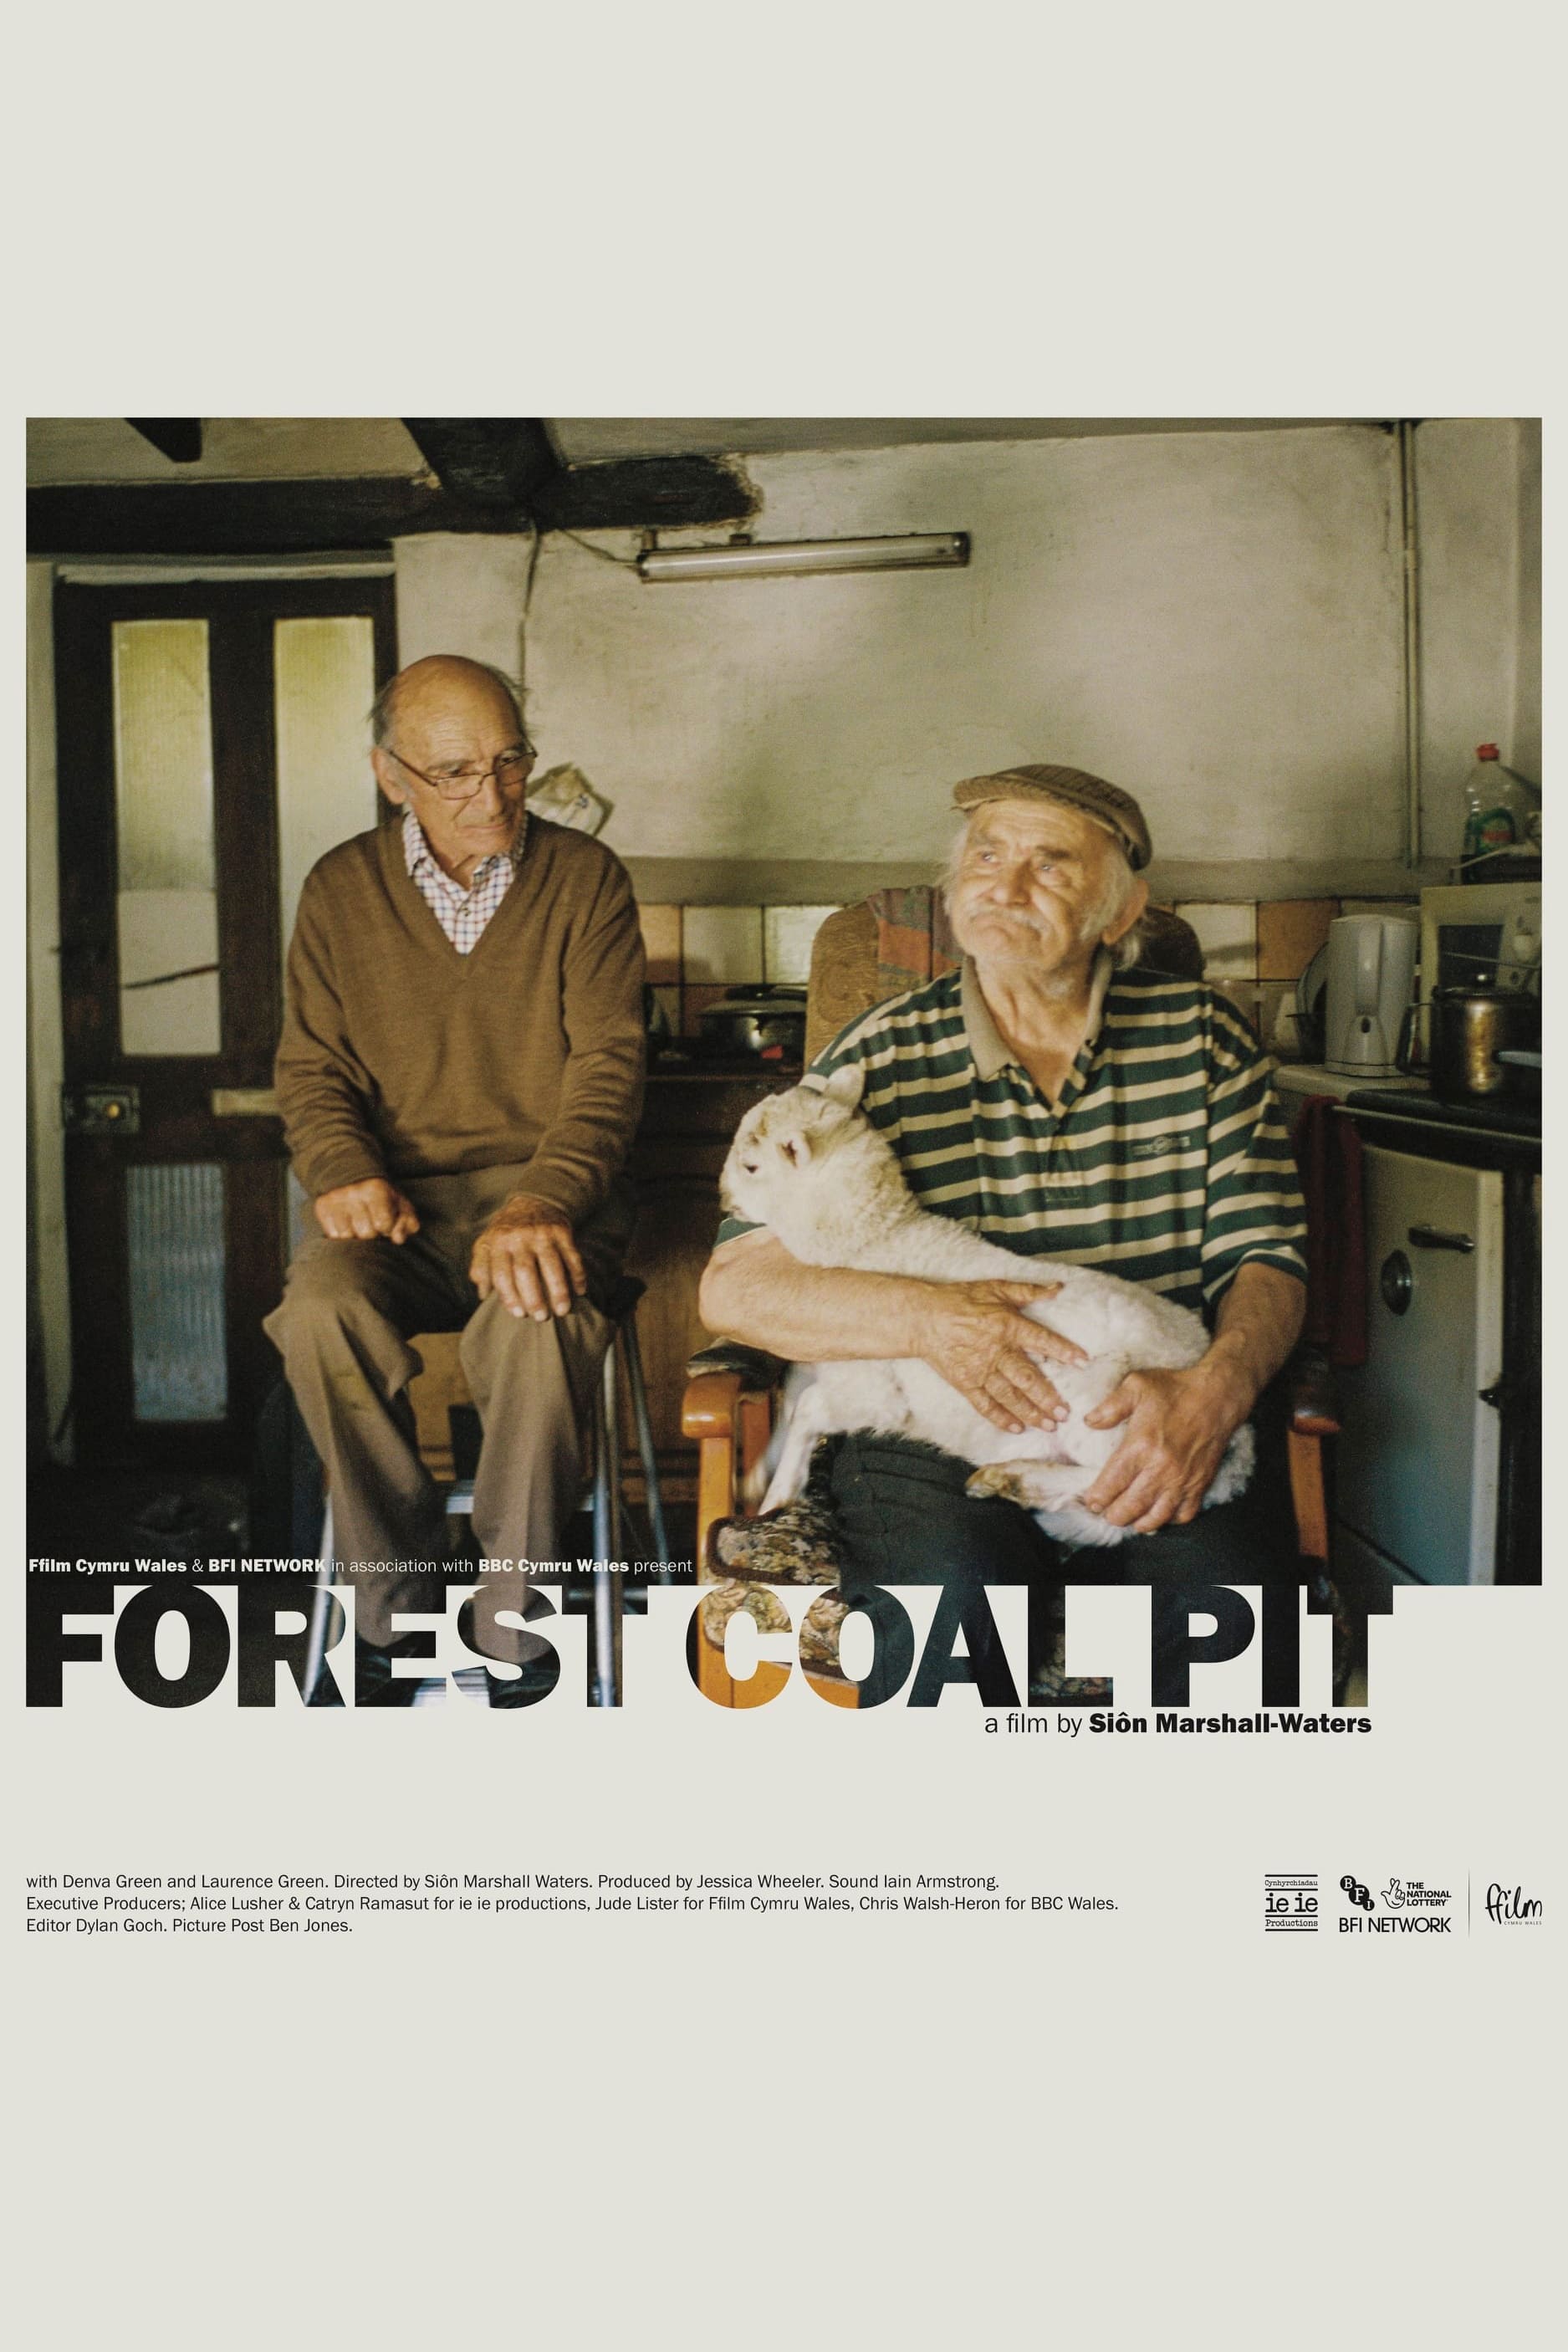 Forest Coal Pit